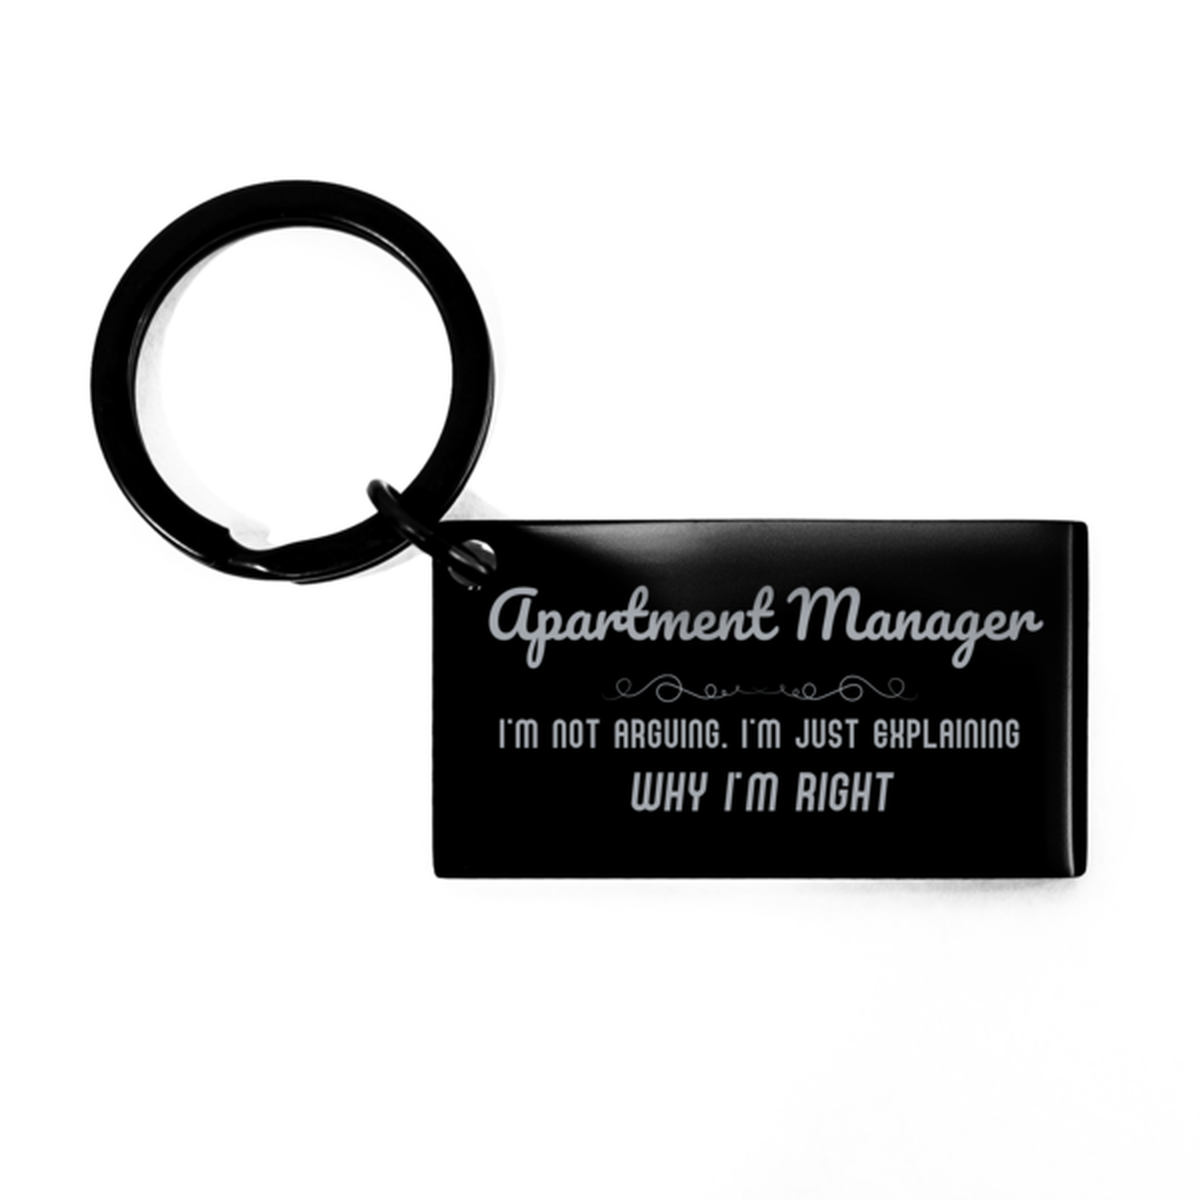 Apartment Manager I'm not Arguing. I'm Just Explaining Why I'm RIGHT Keychain, Funny Saying Quote Apartment Manager Gifts For Apartment Manager Graduation Birthday Christmas Gifts for Men Women Coworker